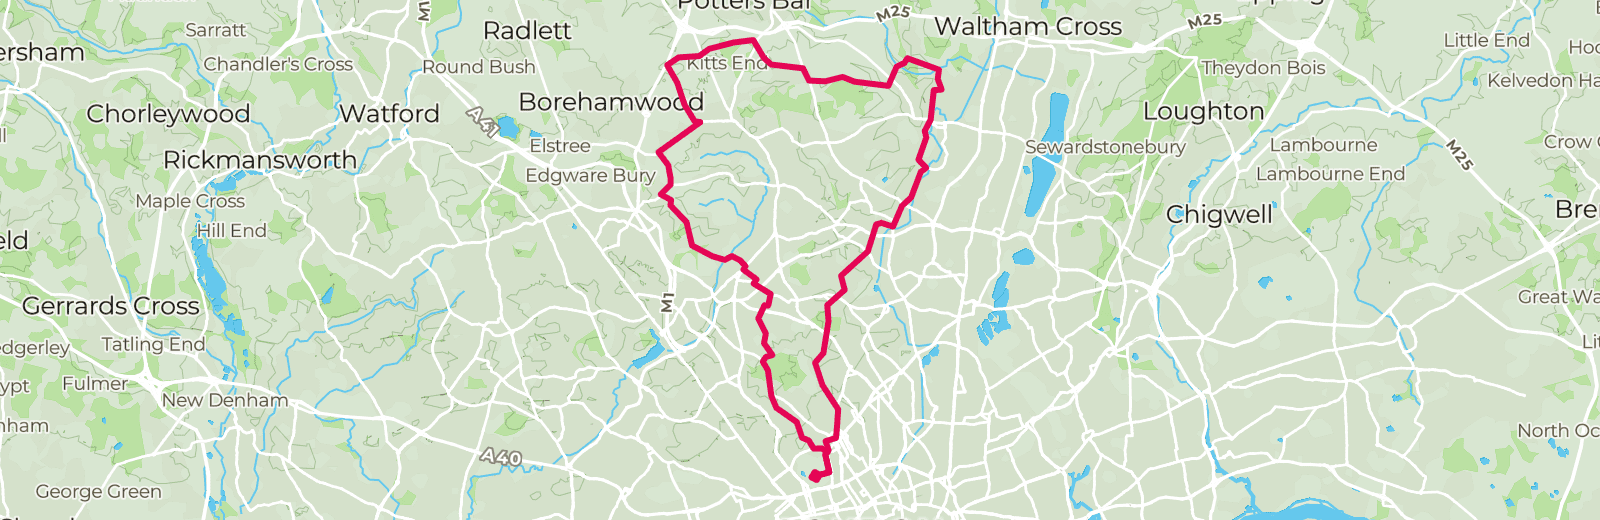 Map of Ferny Hill Fifty route